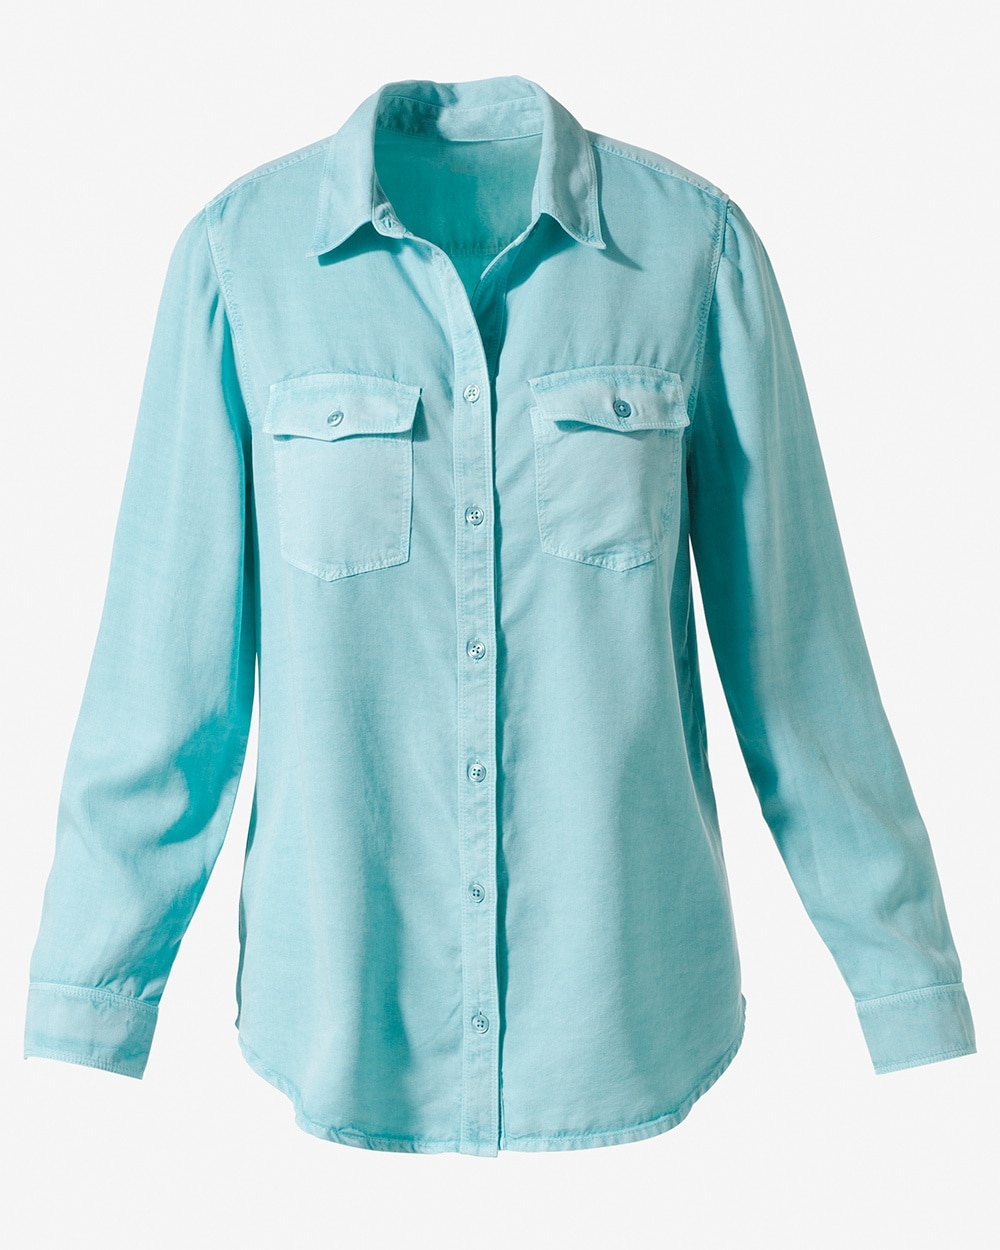 Soft Washed Femme Utility Button-Down Shirt